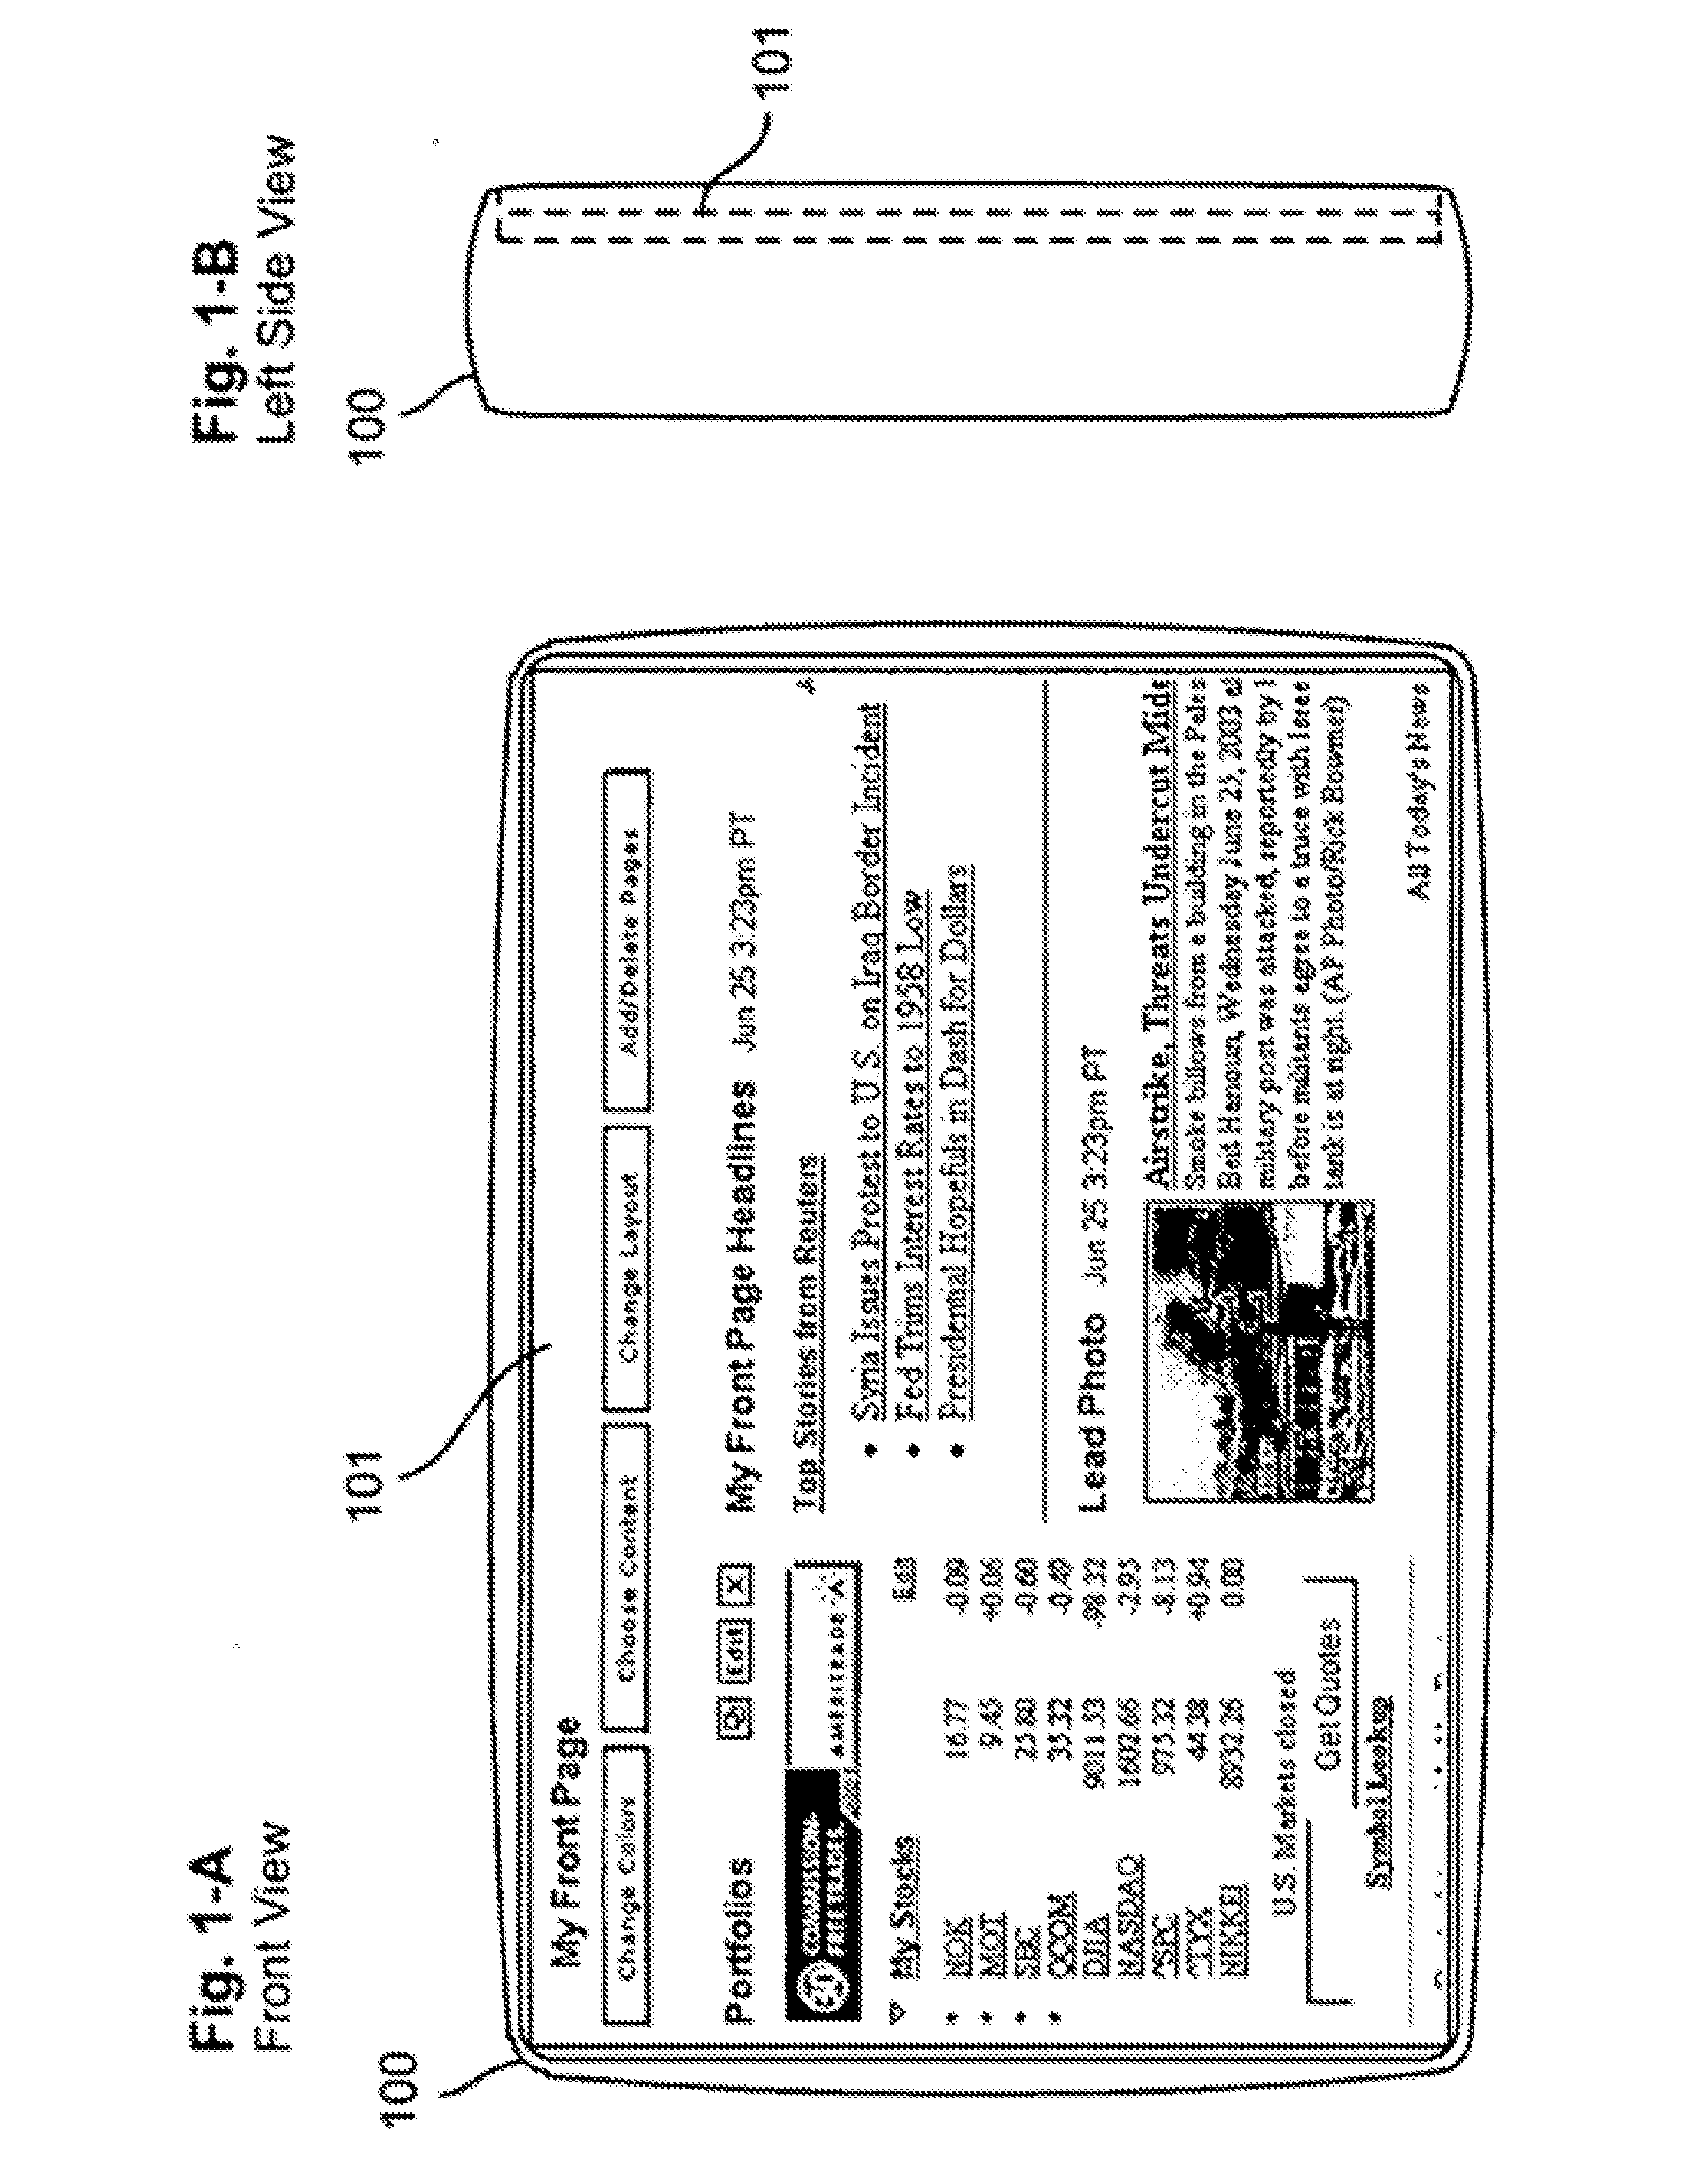 Multimedia client interface devices and methods